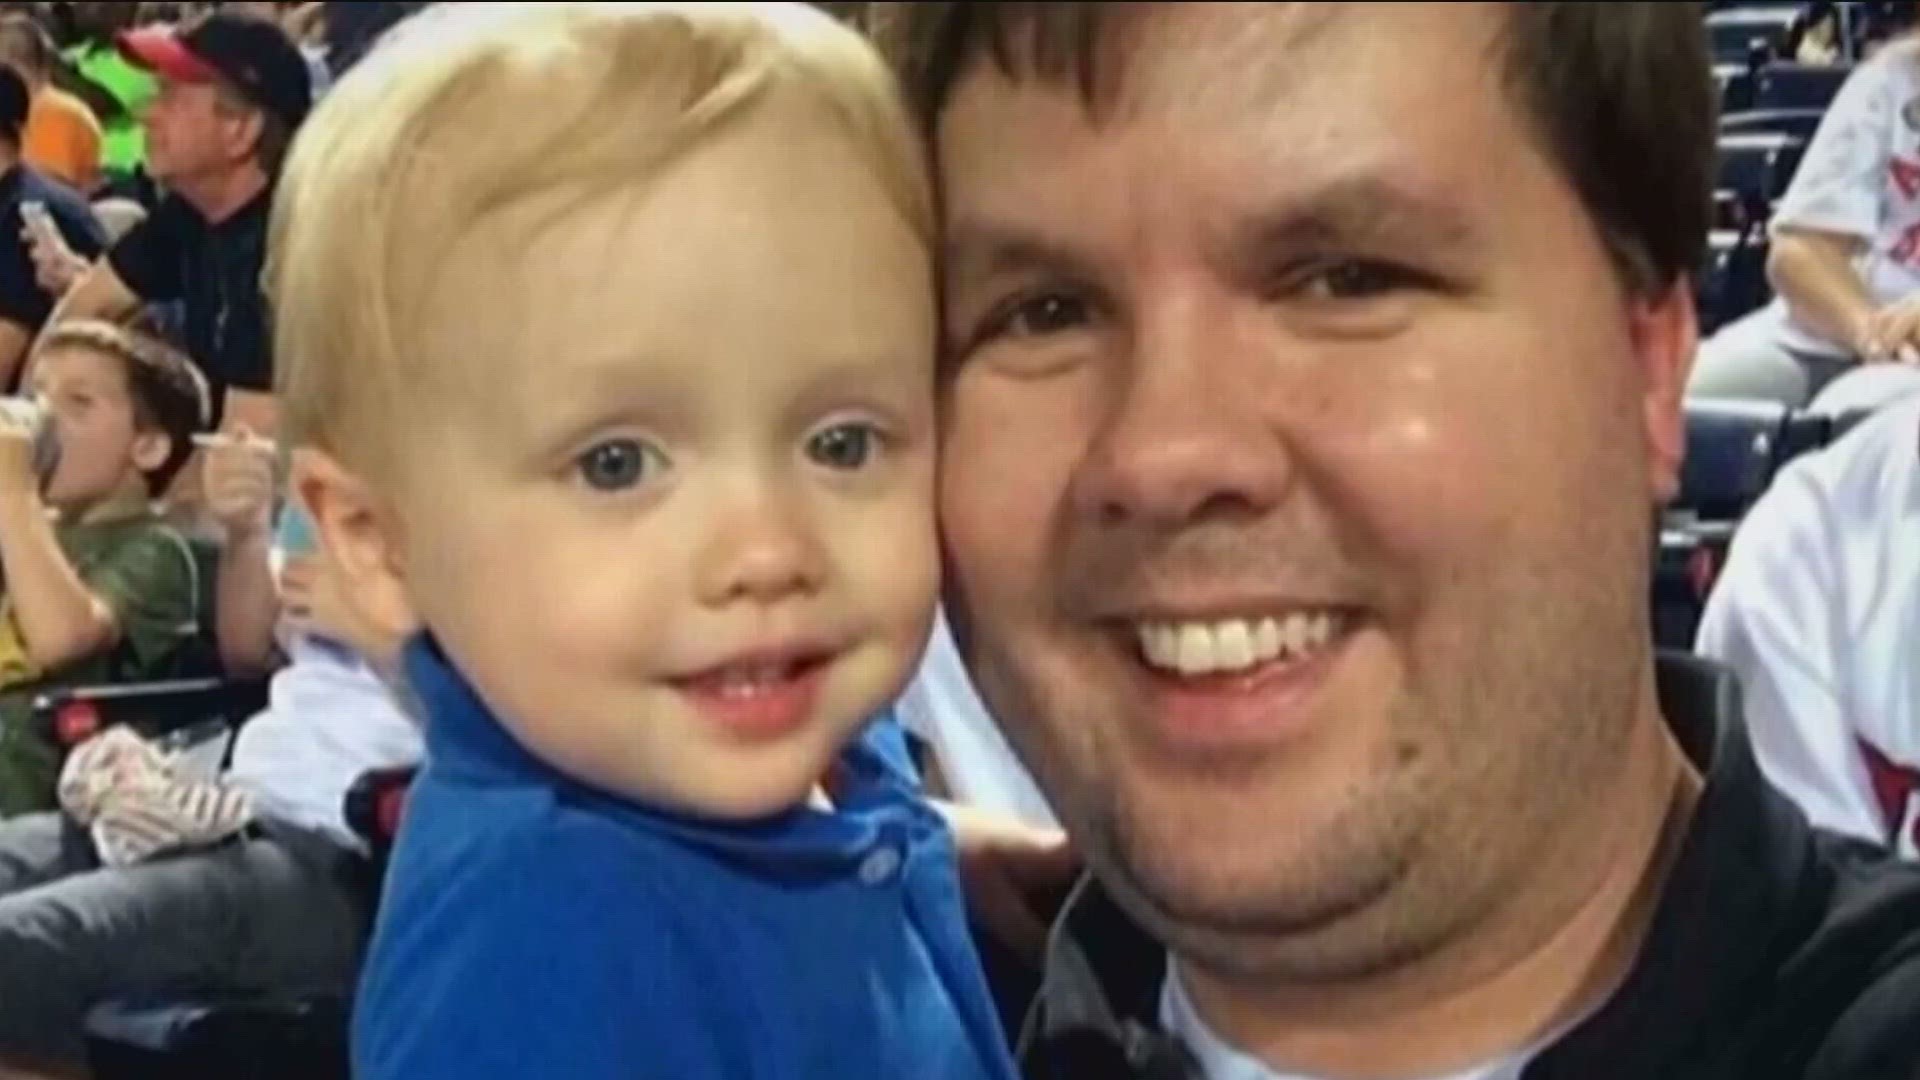 Cooper, who was 22 months, was left strapped into a rear-facing car seat in the back of his father's SUV on June 18, 2014.